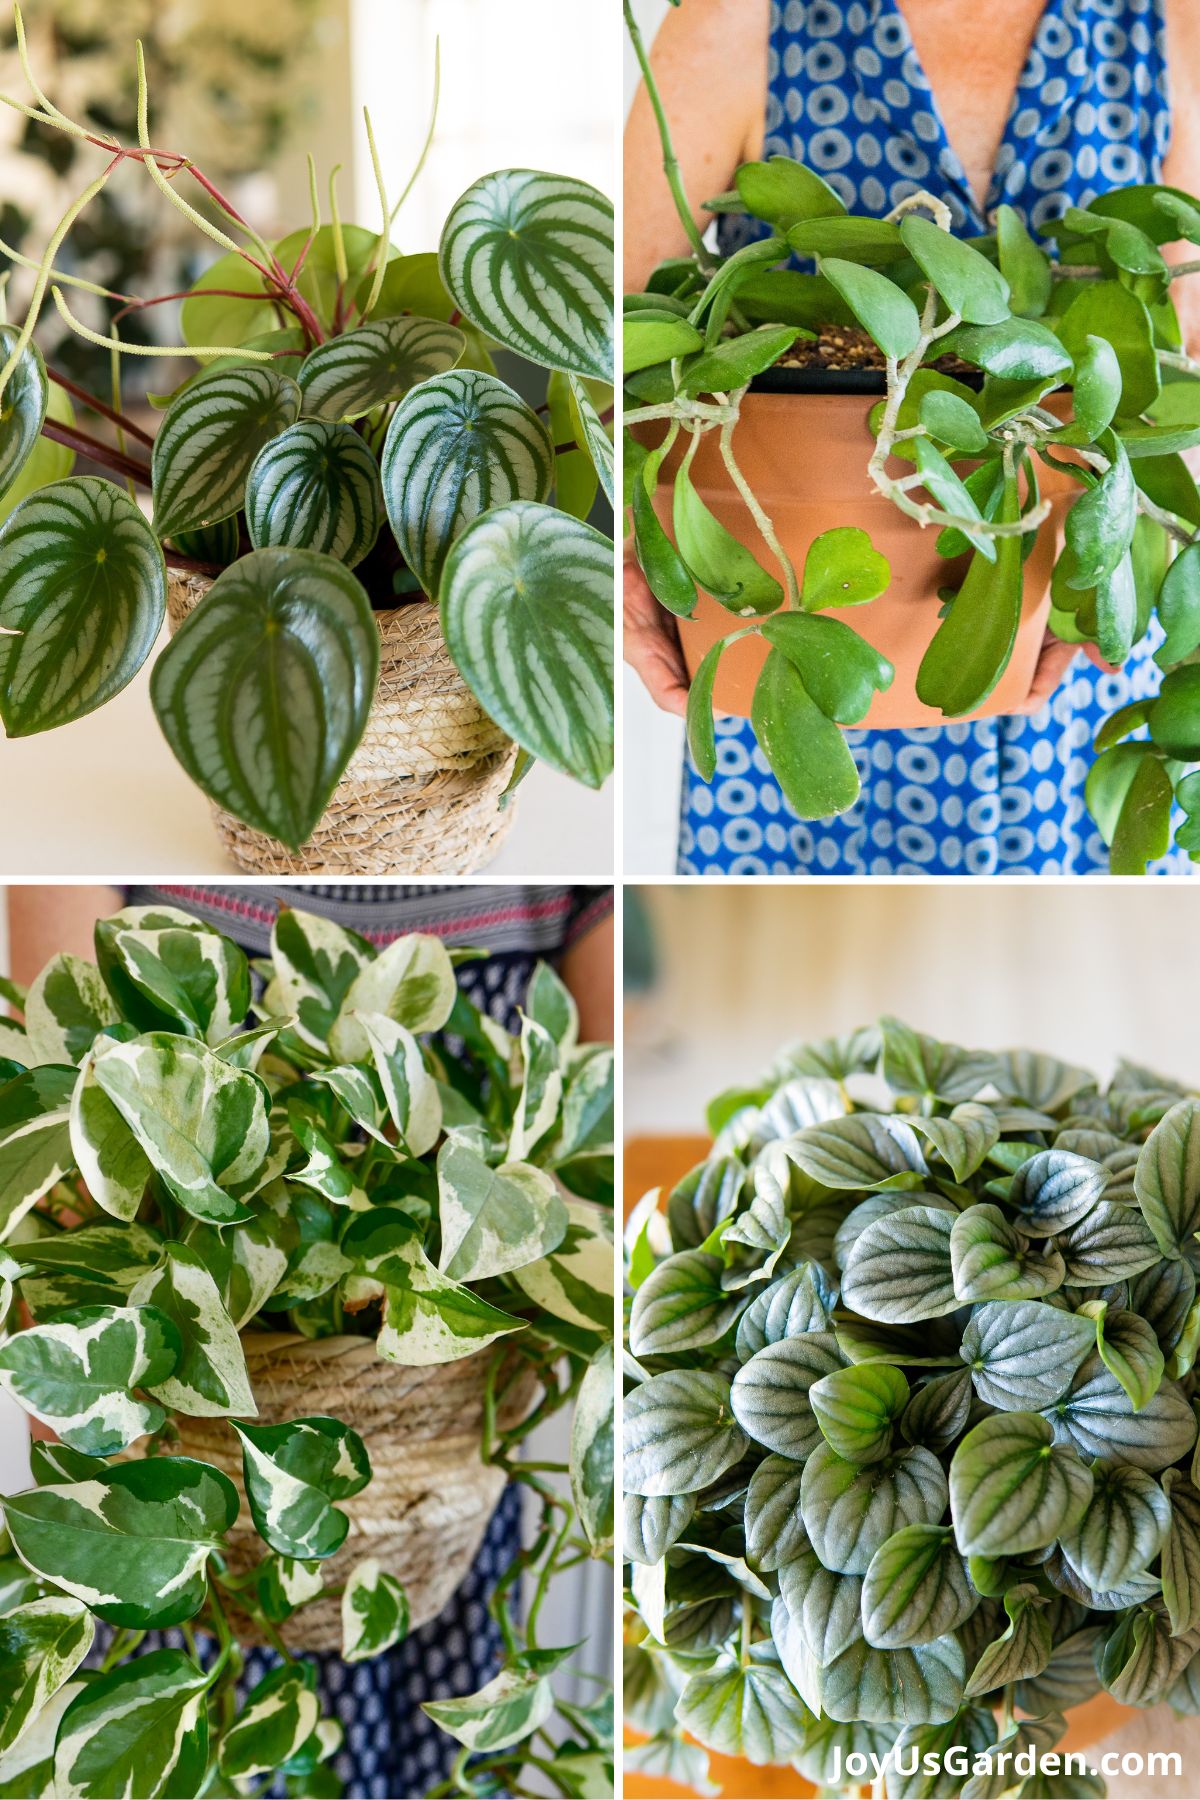 4 photo collage of: watermelon peperomia, nell foster inblue top holding a hoya kerrii in a clay pot, pothos n joy, and ripple peperomia